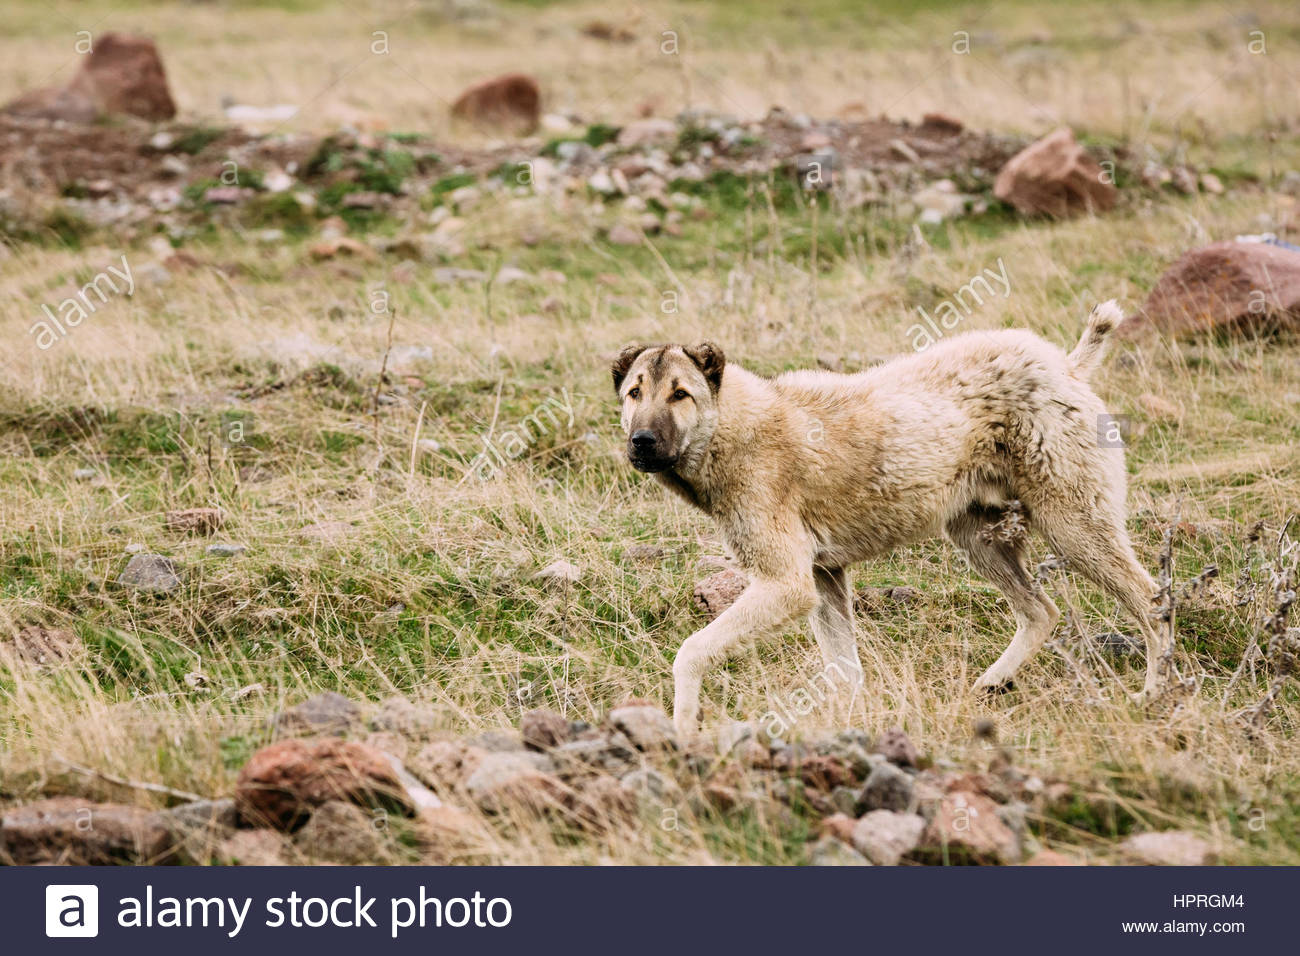 central-asian-shepherd-dog-tending-sheep-in-the-mountains-of-georgia-HPRGM4